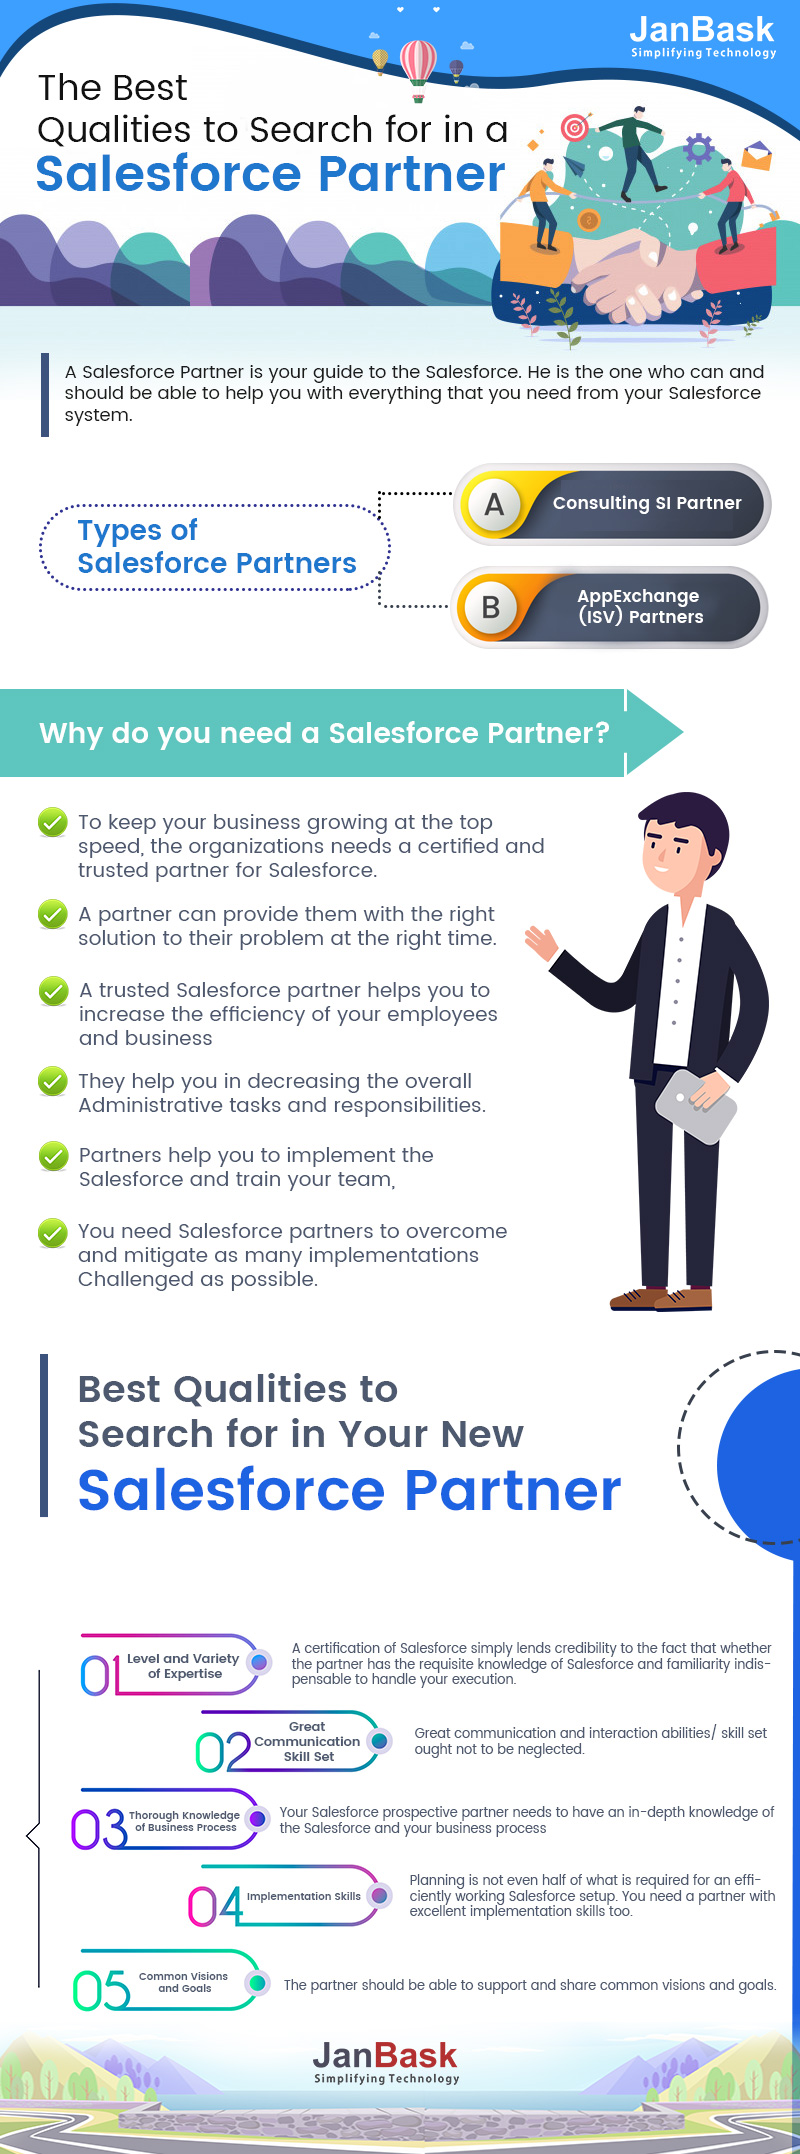 The Best Qualities to Search for in a Salesforce Partner